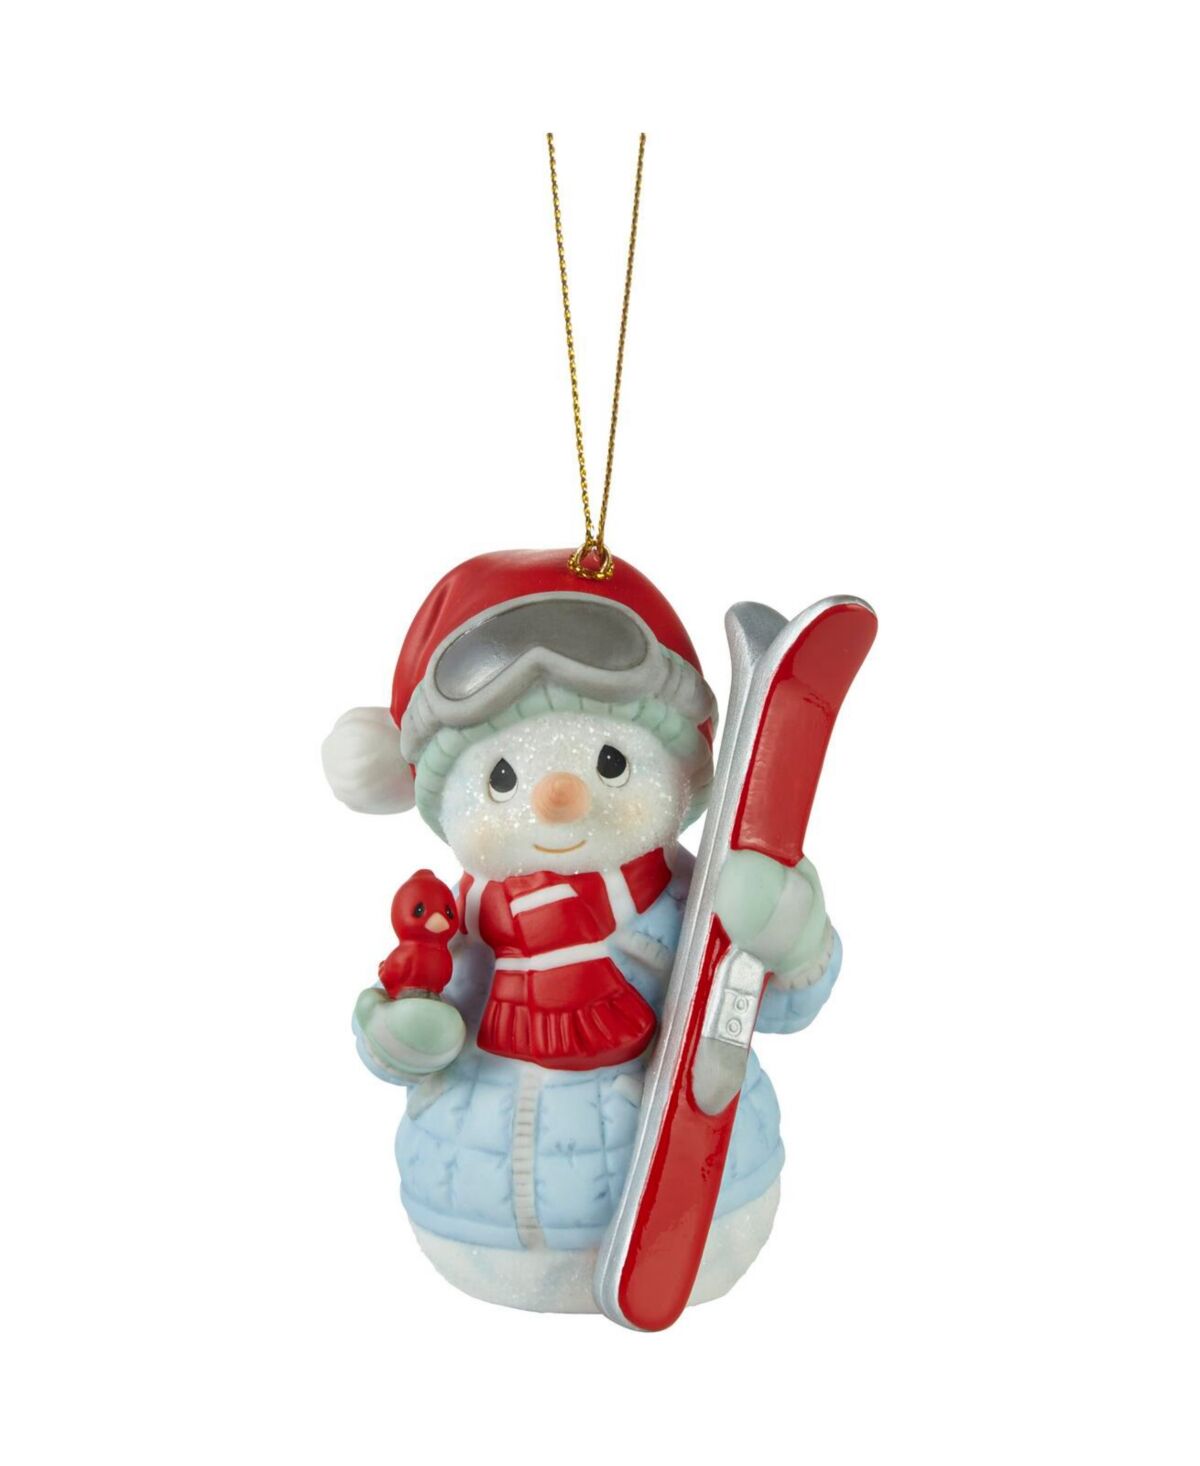 Precious Moments Tis The Ski-Son To Be Jolly Annual Snowman Bisque Porcelain Ornament - Multicolored